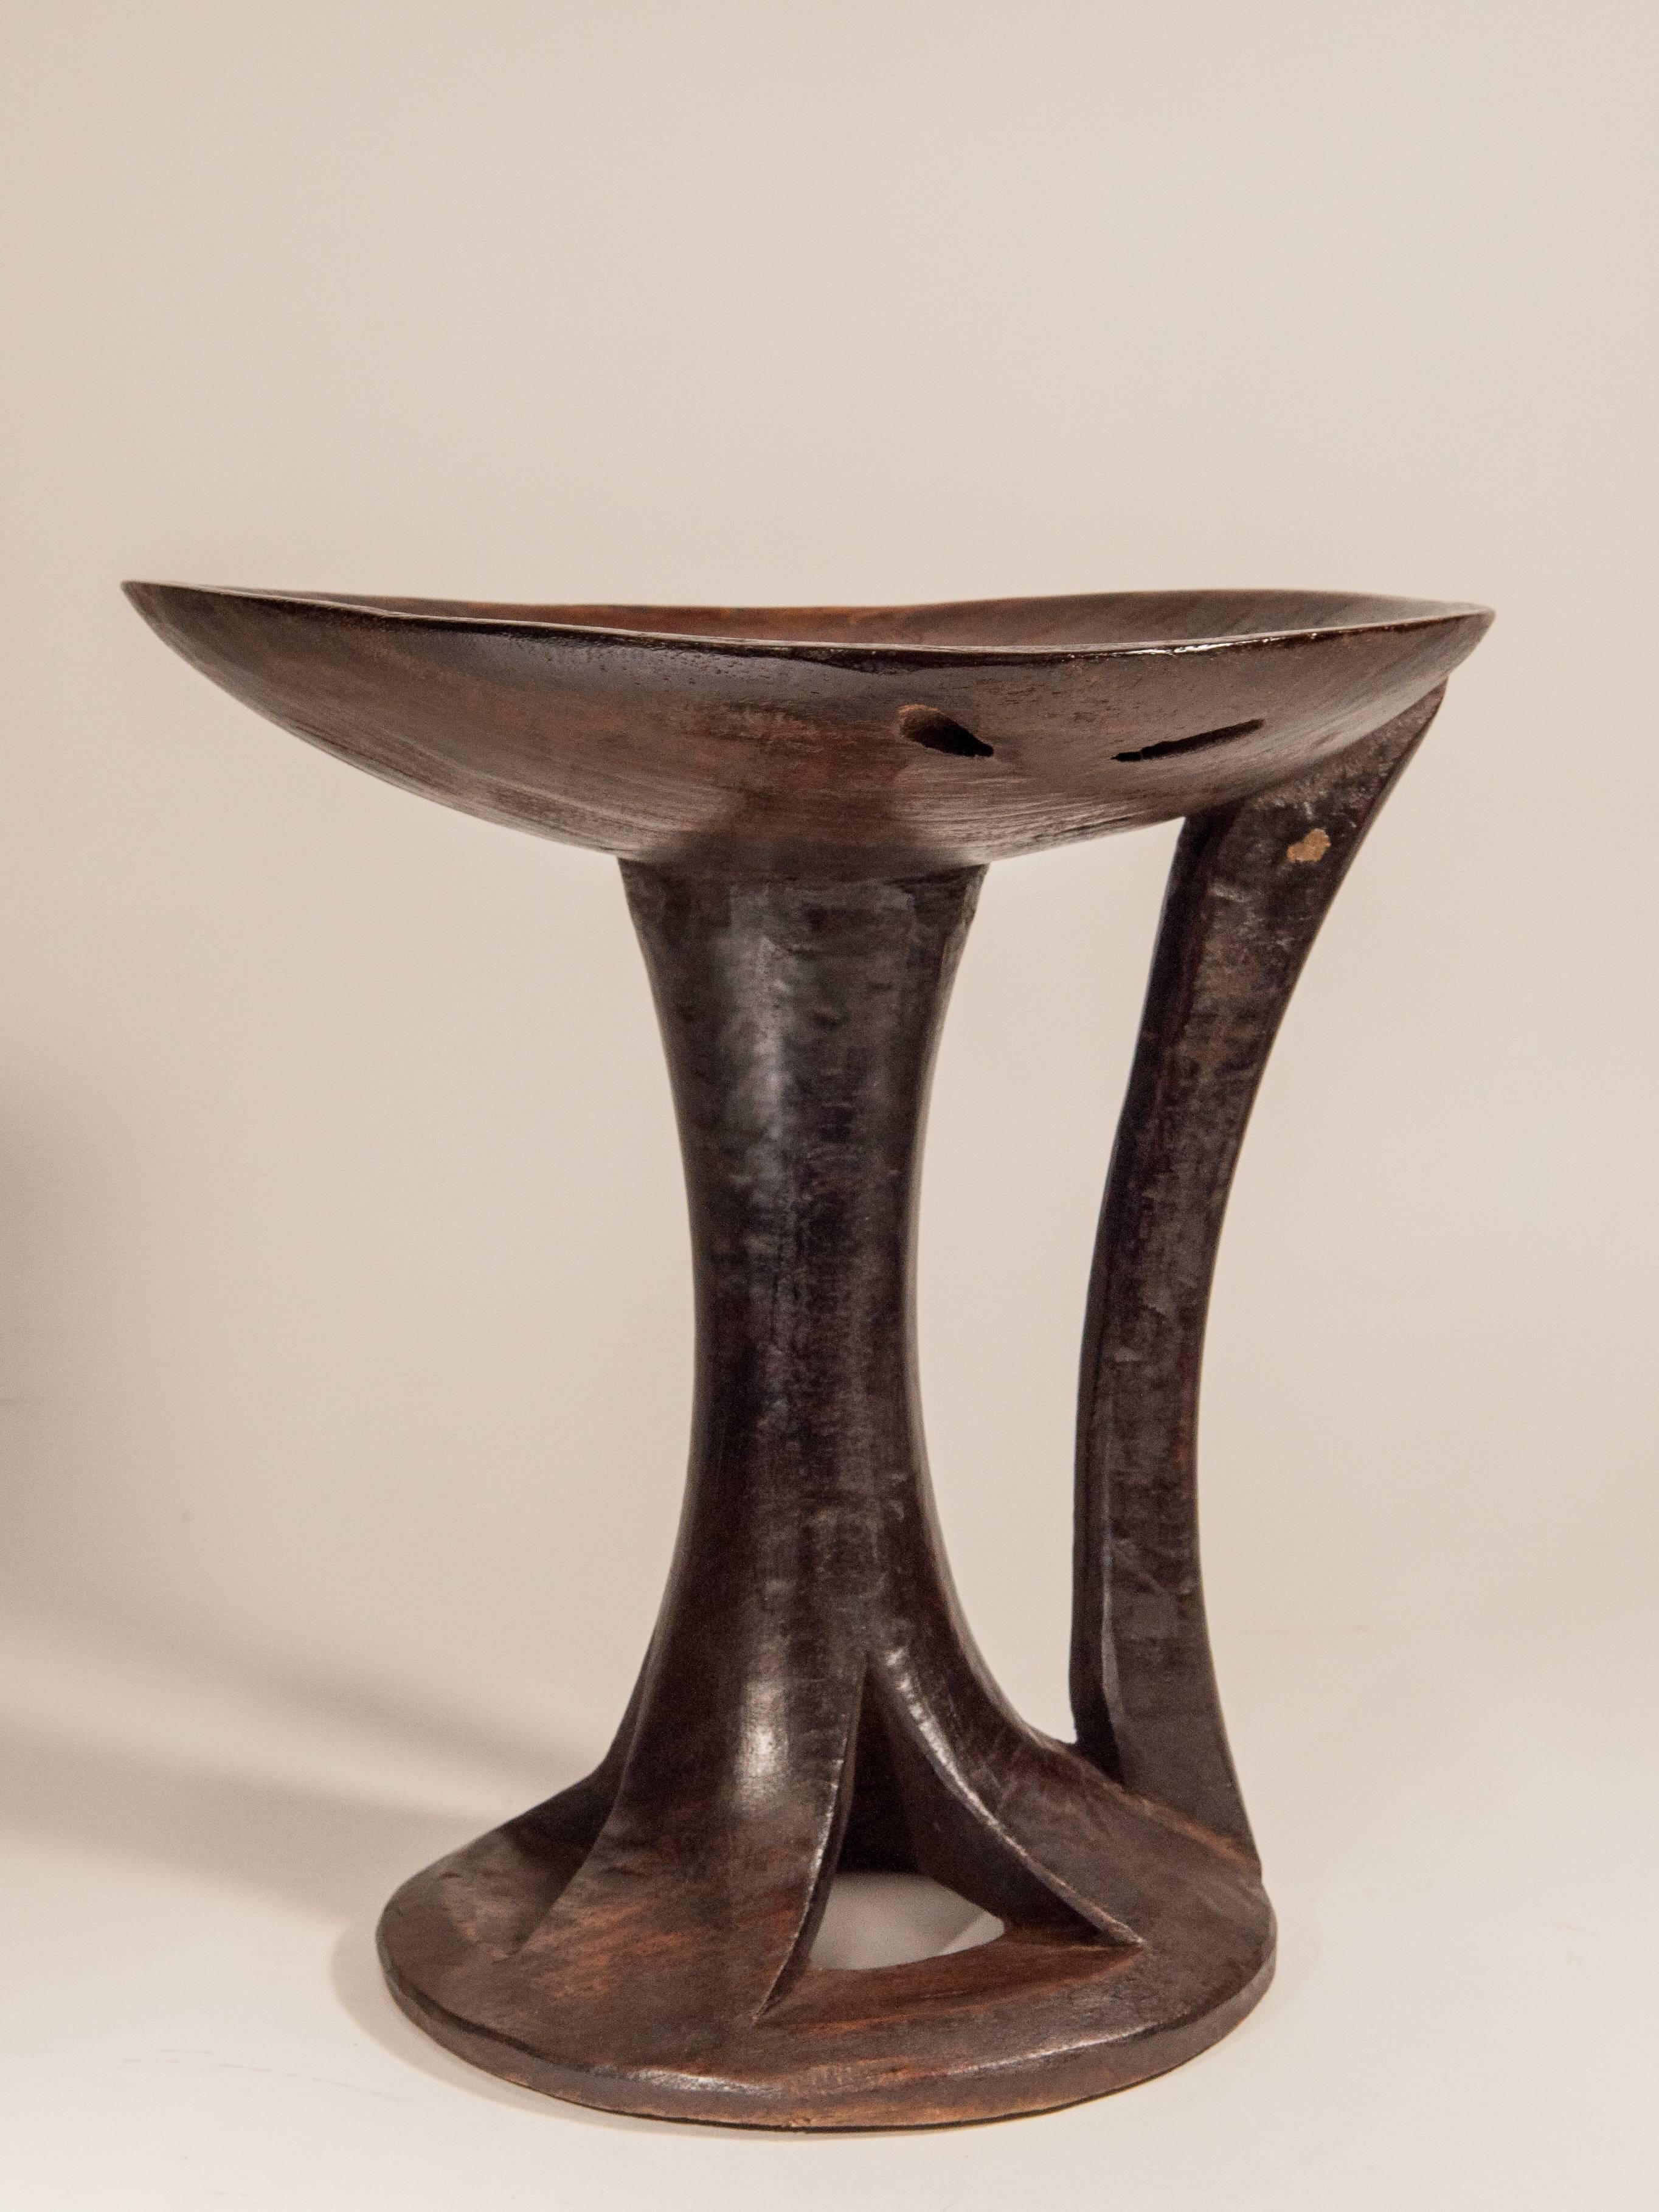 Indian Tribal Wooden Food Tray on Stand with Handle, Nagaland, Mid-Late 20th Century